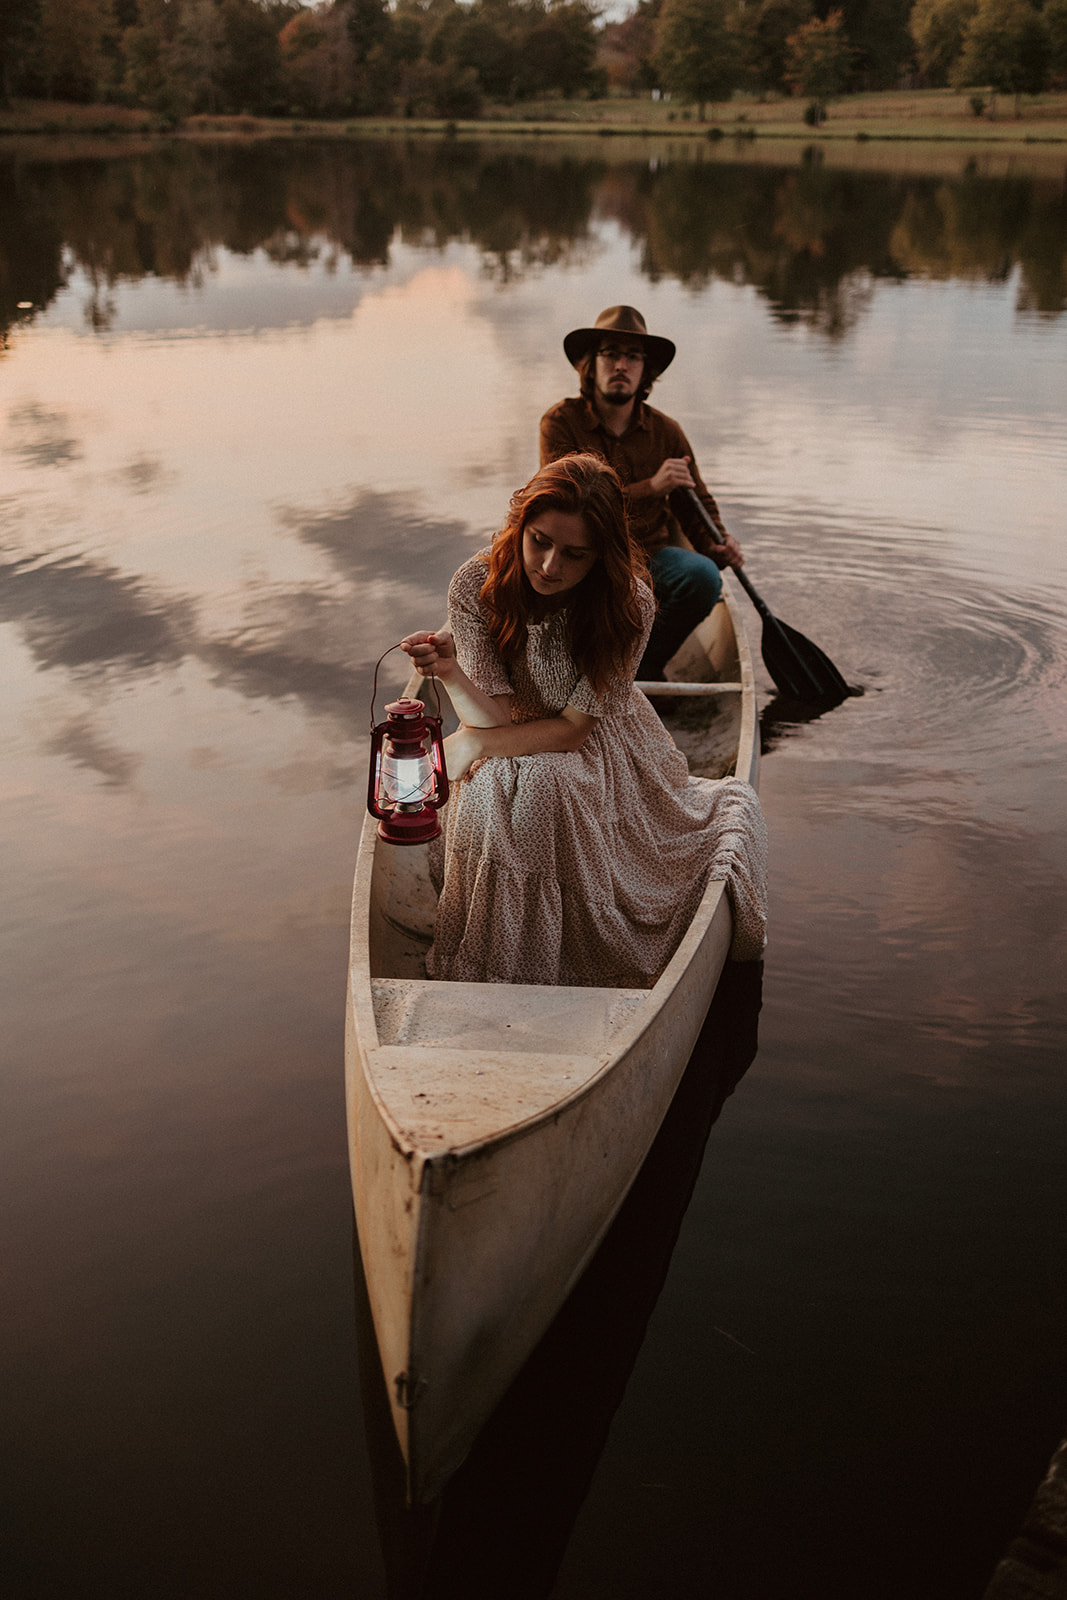 the couple rides together at sunset in their canoe